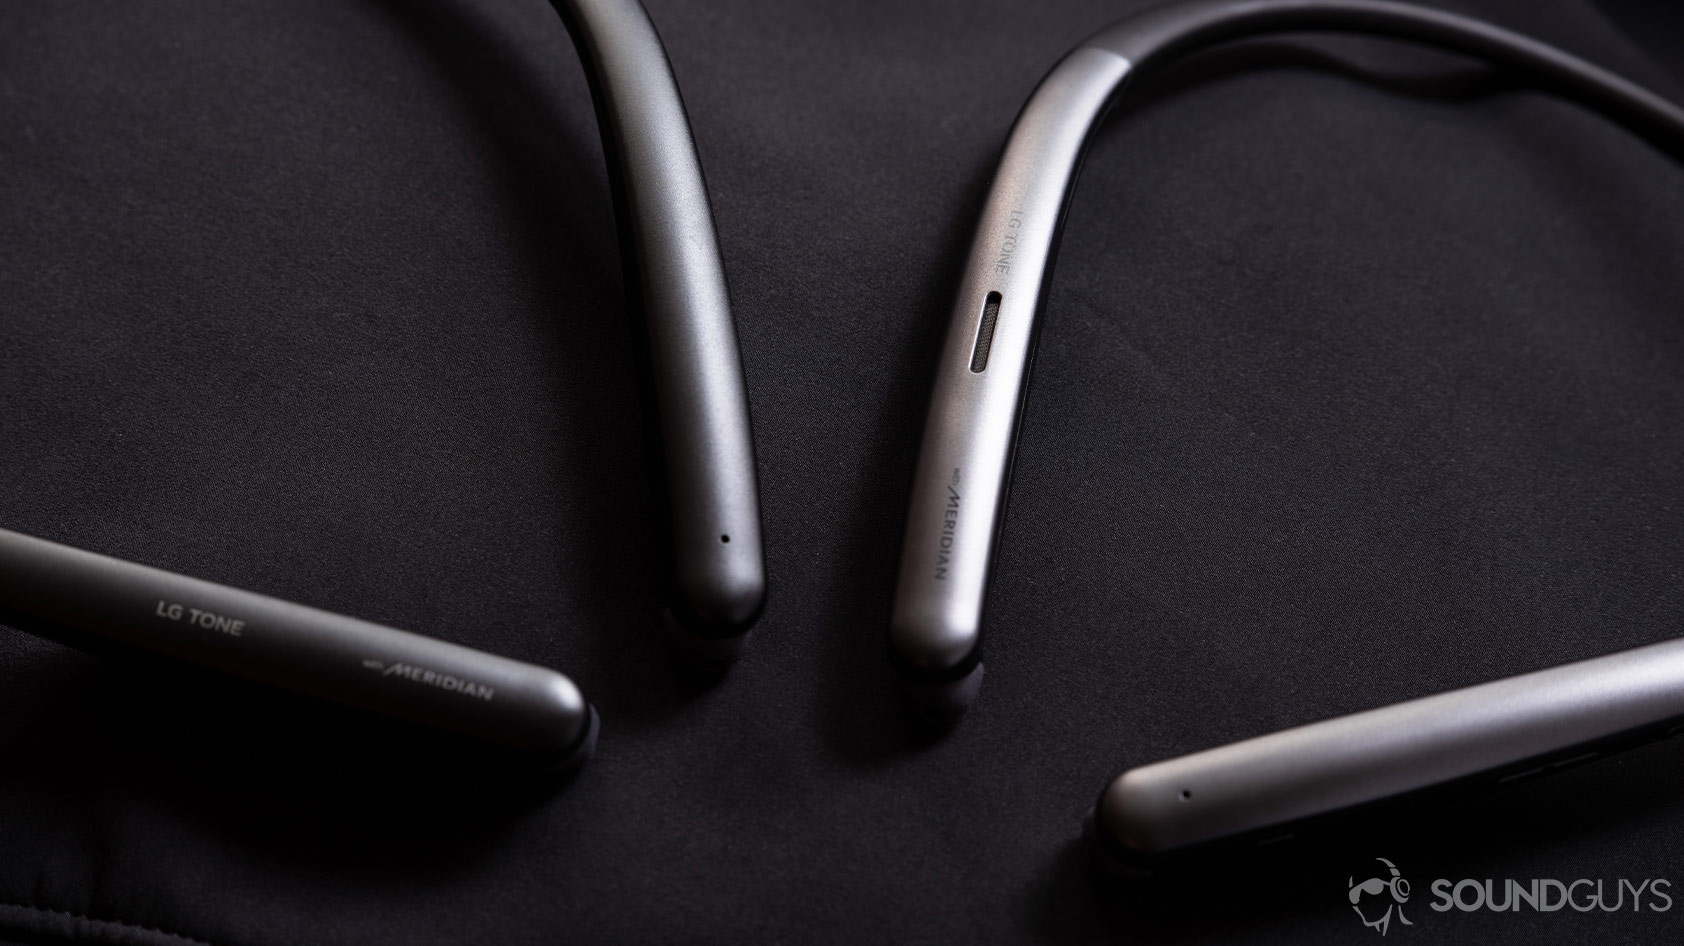 LG Tone Style SL6s and SL5 neckband wireless earbuds next to each other and angled on a black surface.